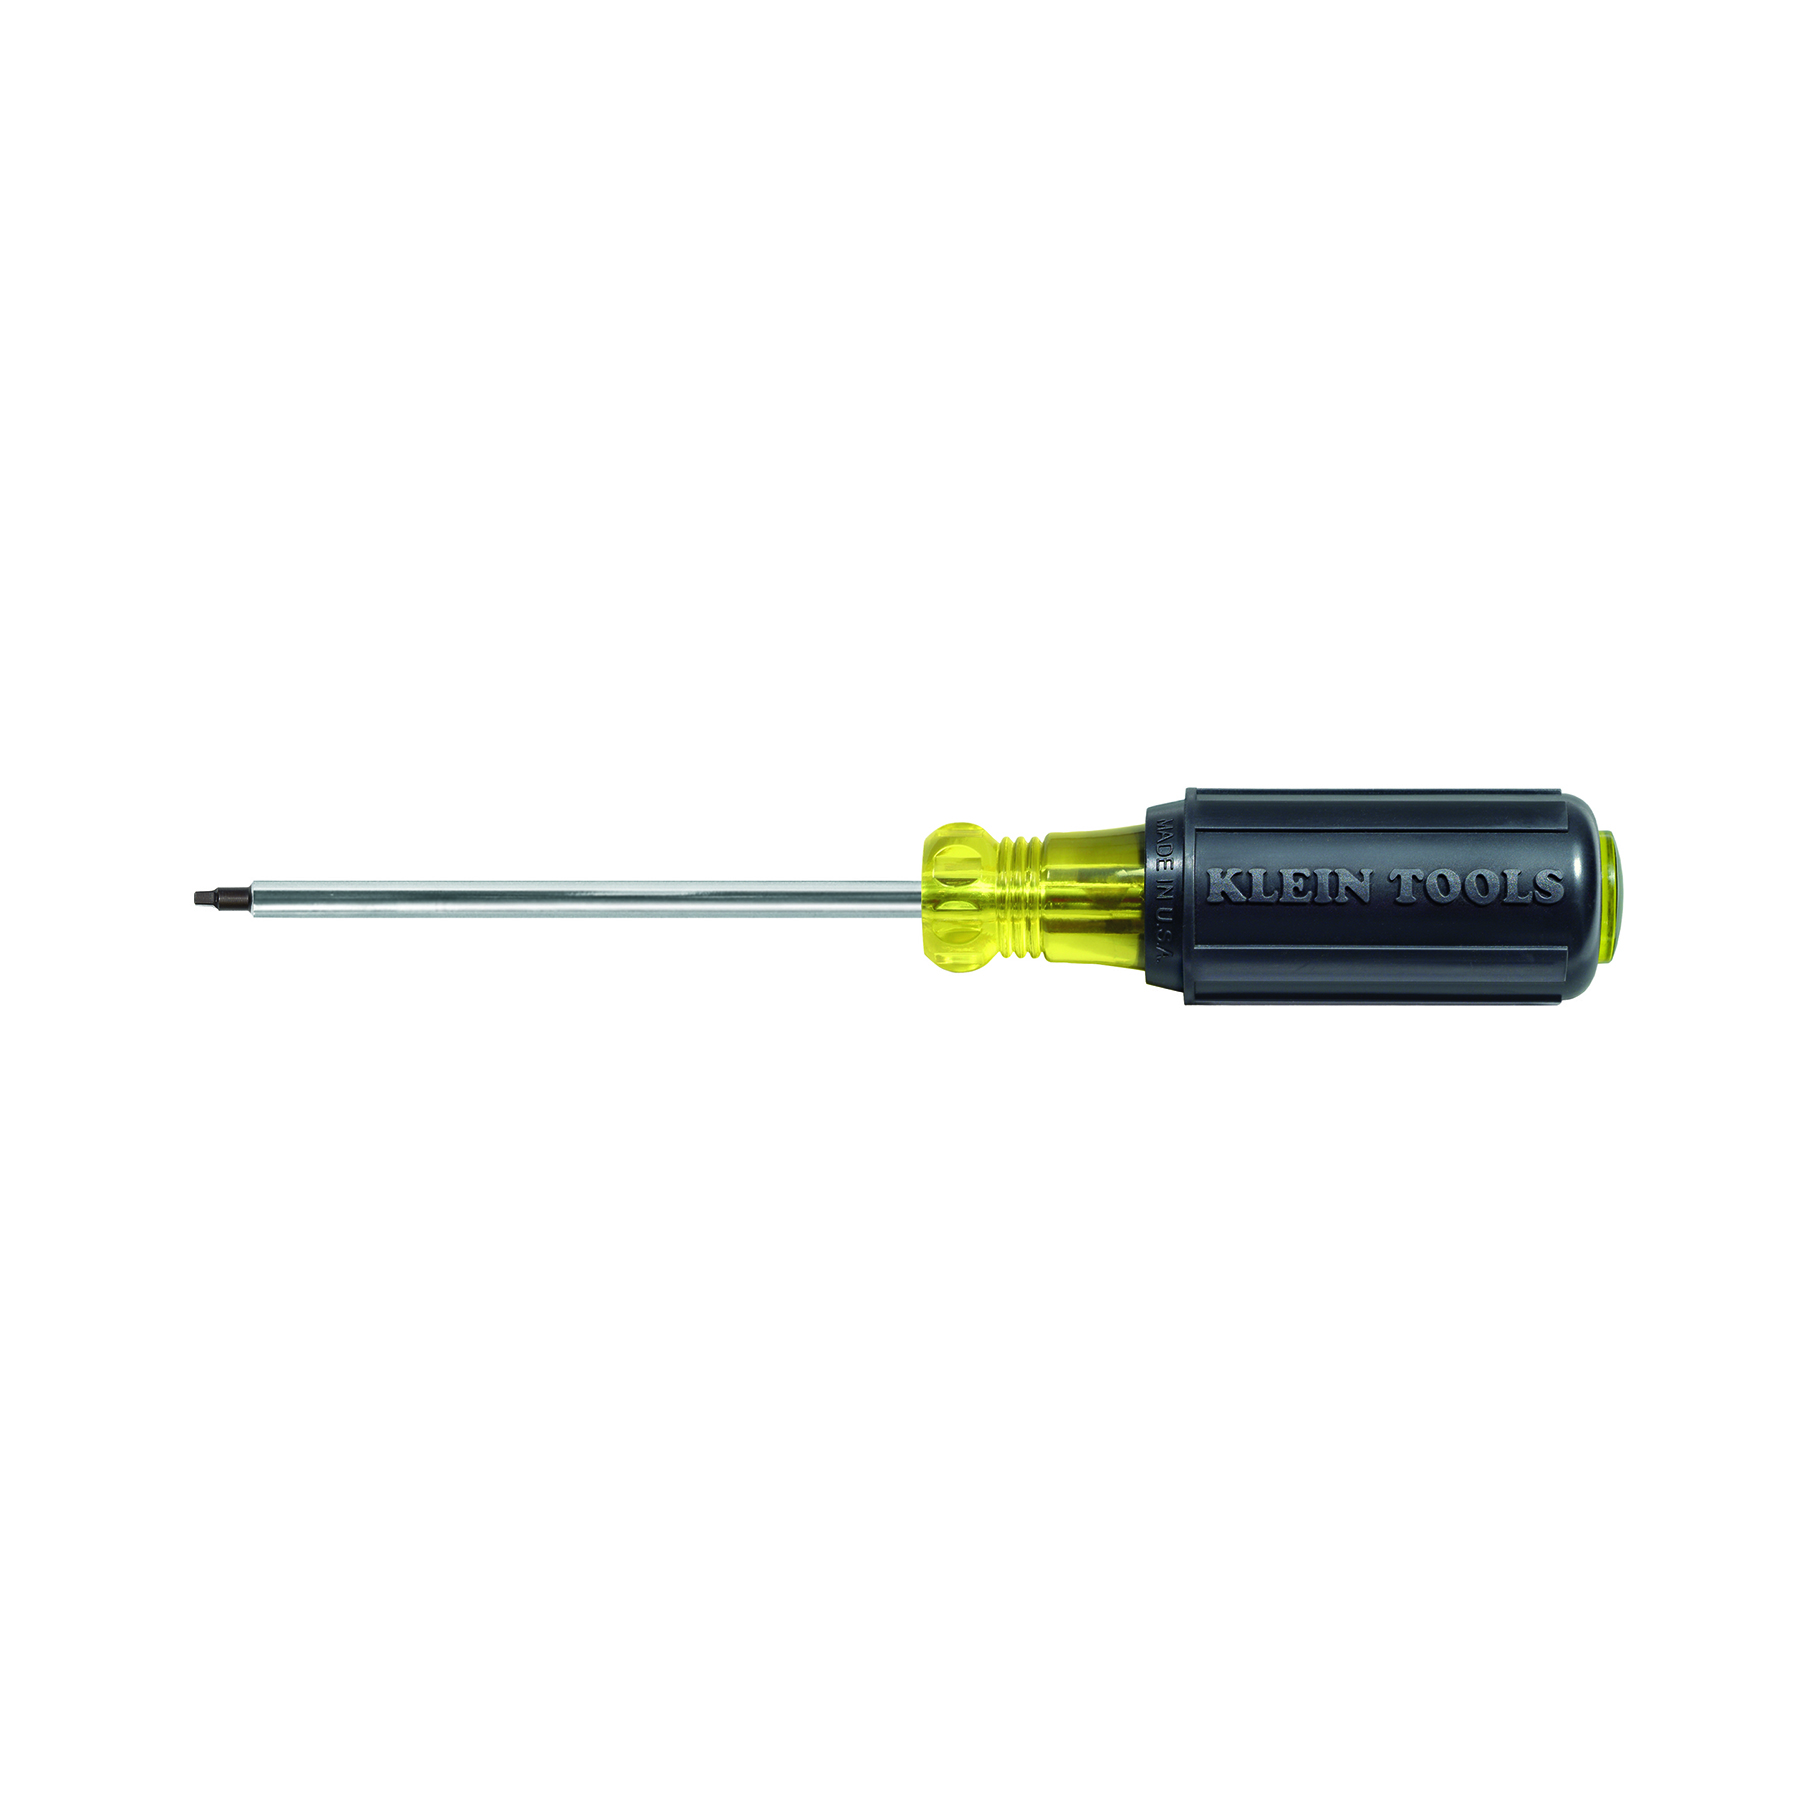 6 mm Padre Ball-Head Screwdriver with Cross Handle 771 